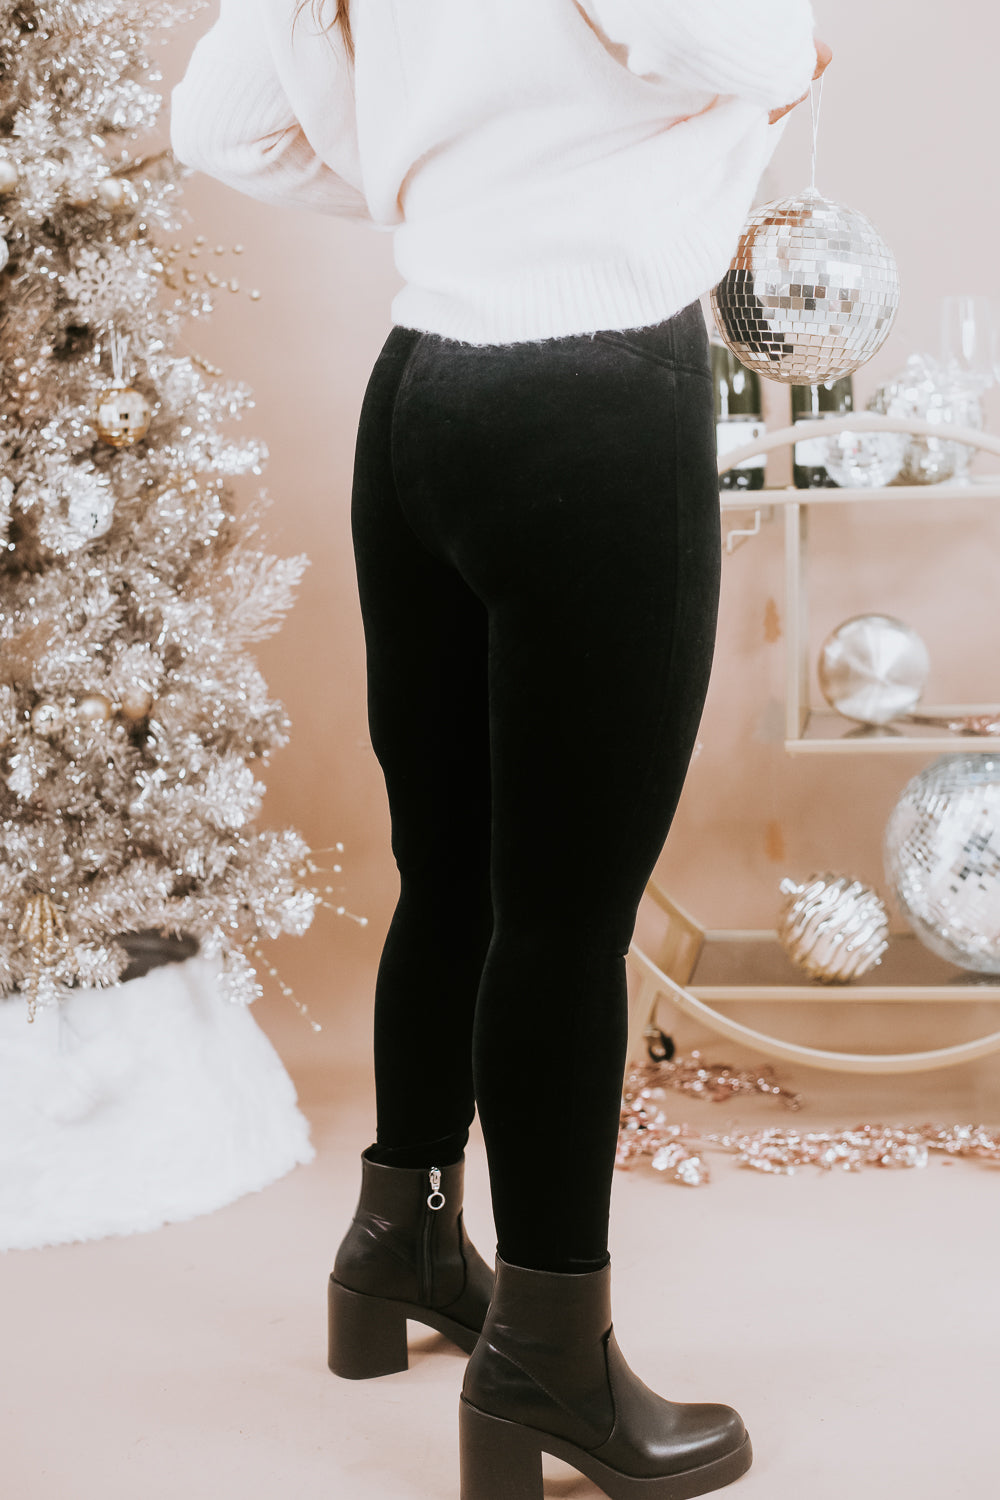 SPANX - Softer than soft, our holiday-ready Velvet Leggings are